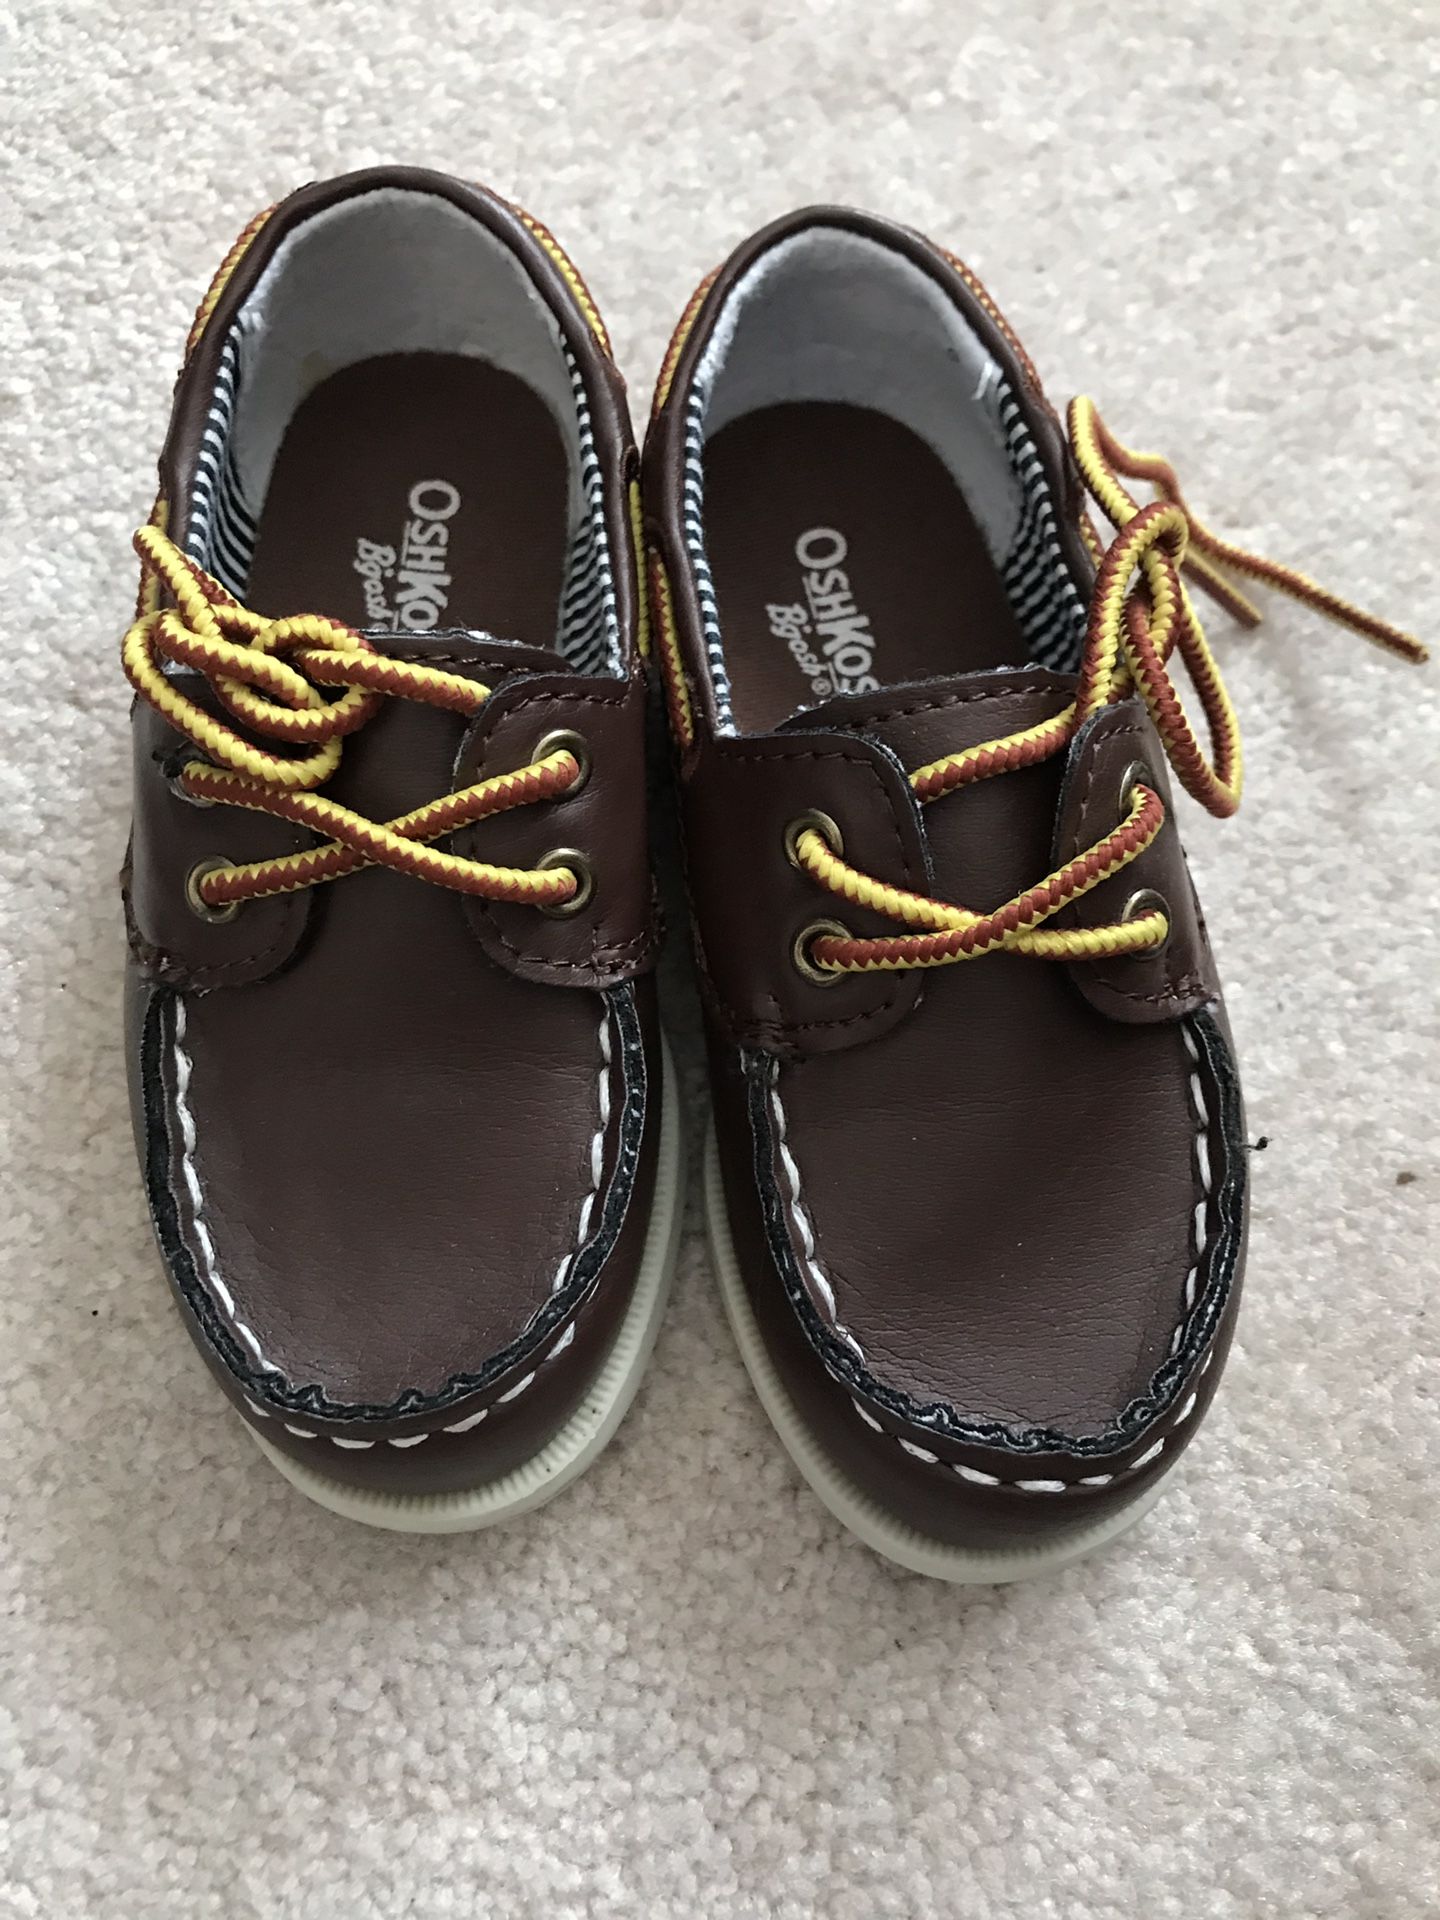 Boys shoes size 7 (toddler) like new